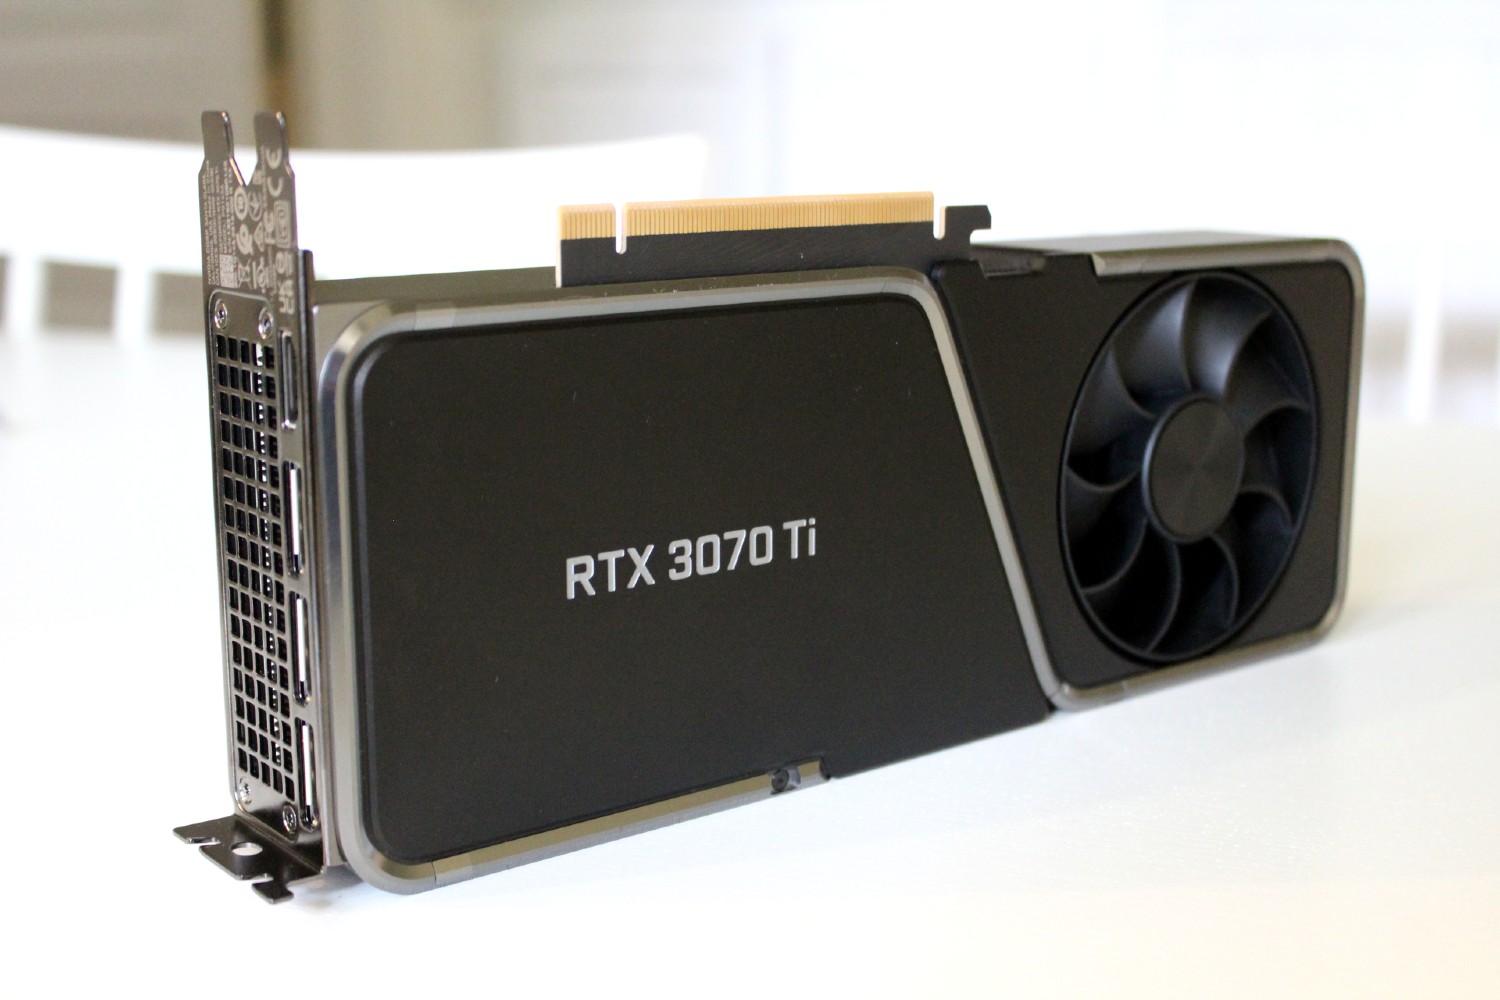 New RTX 3070 Ti Went On Sale and Sold Out Immediately